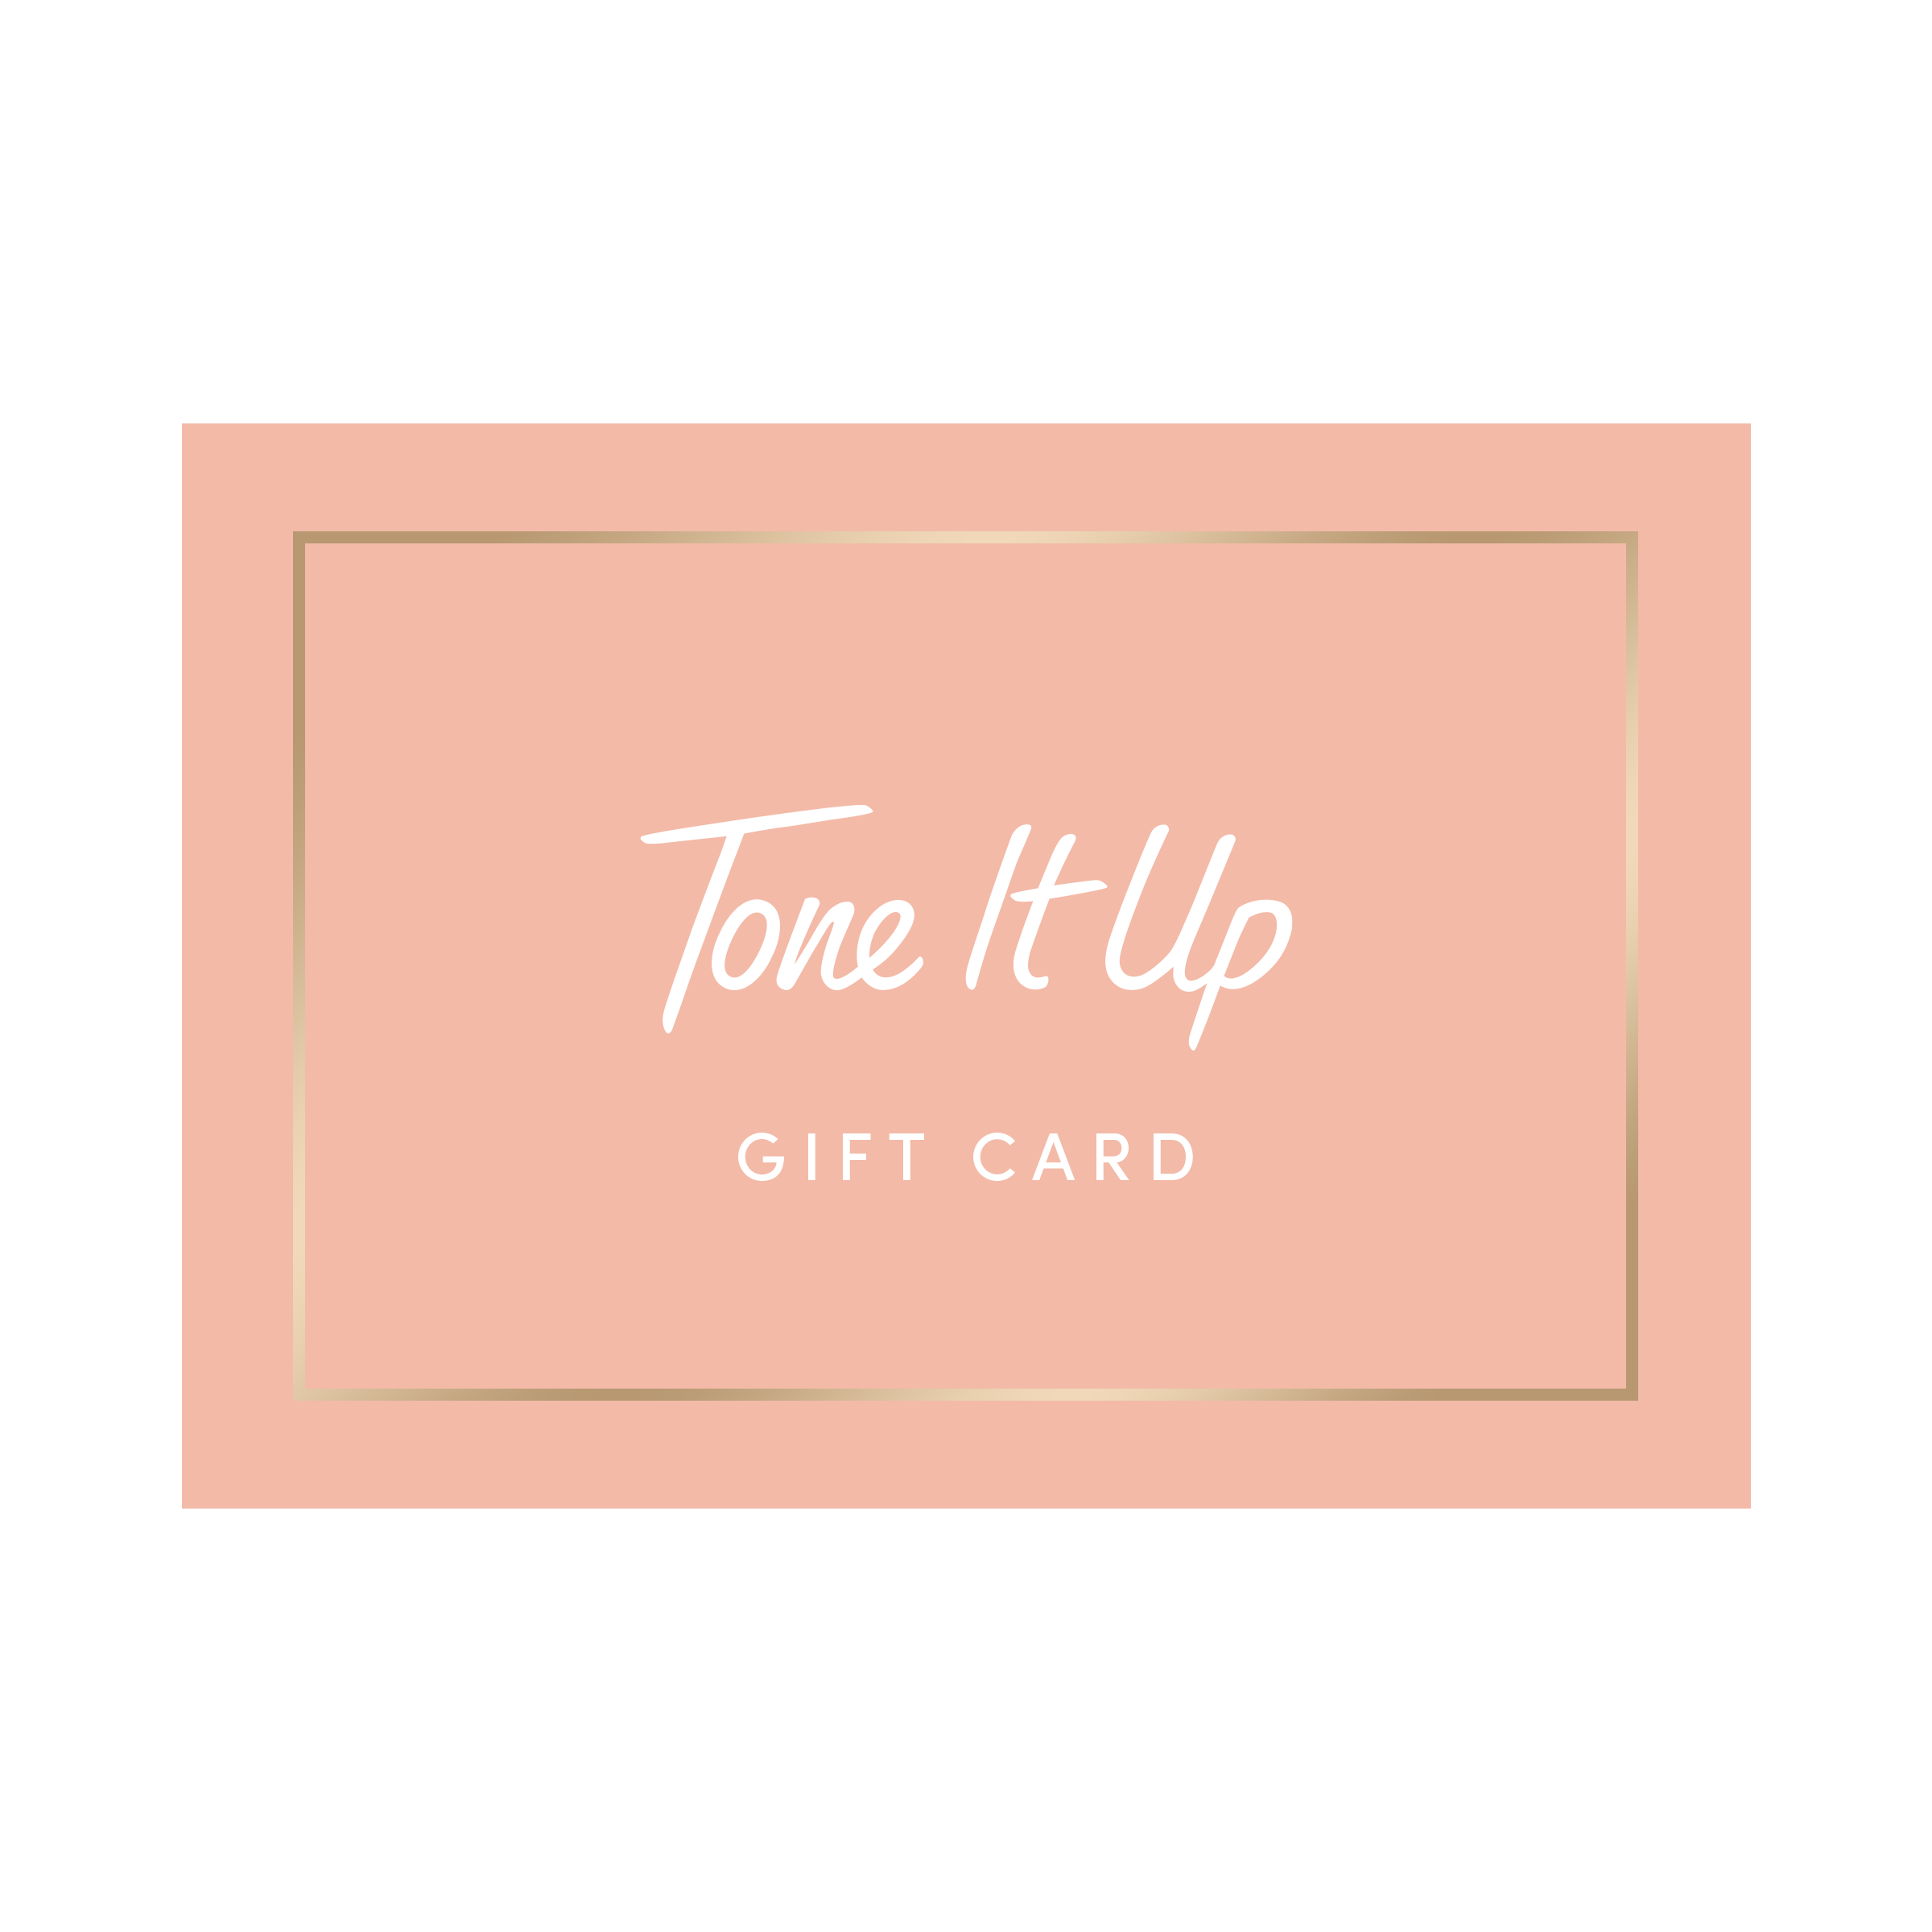 Tone It Up Gift Card